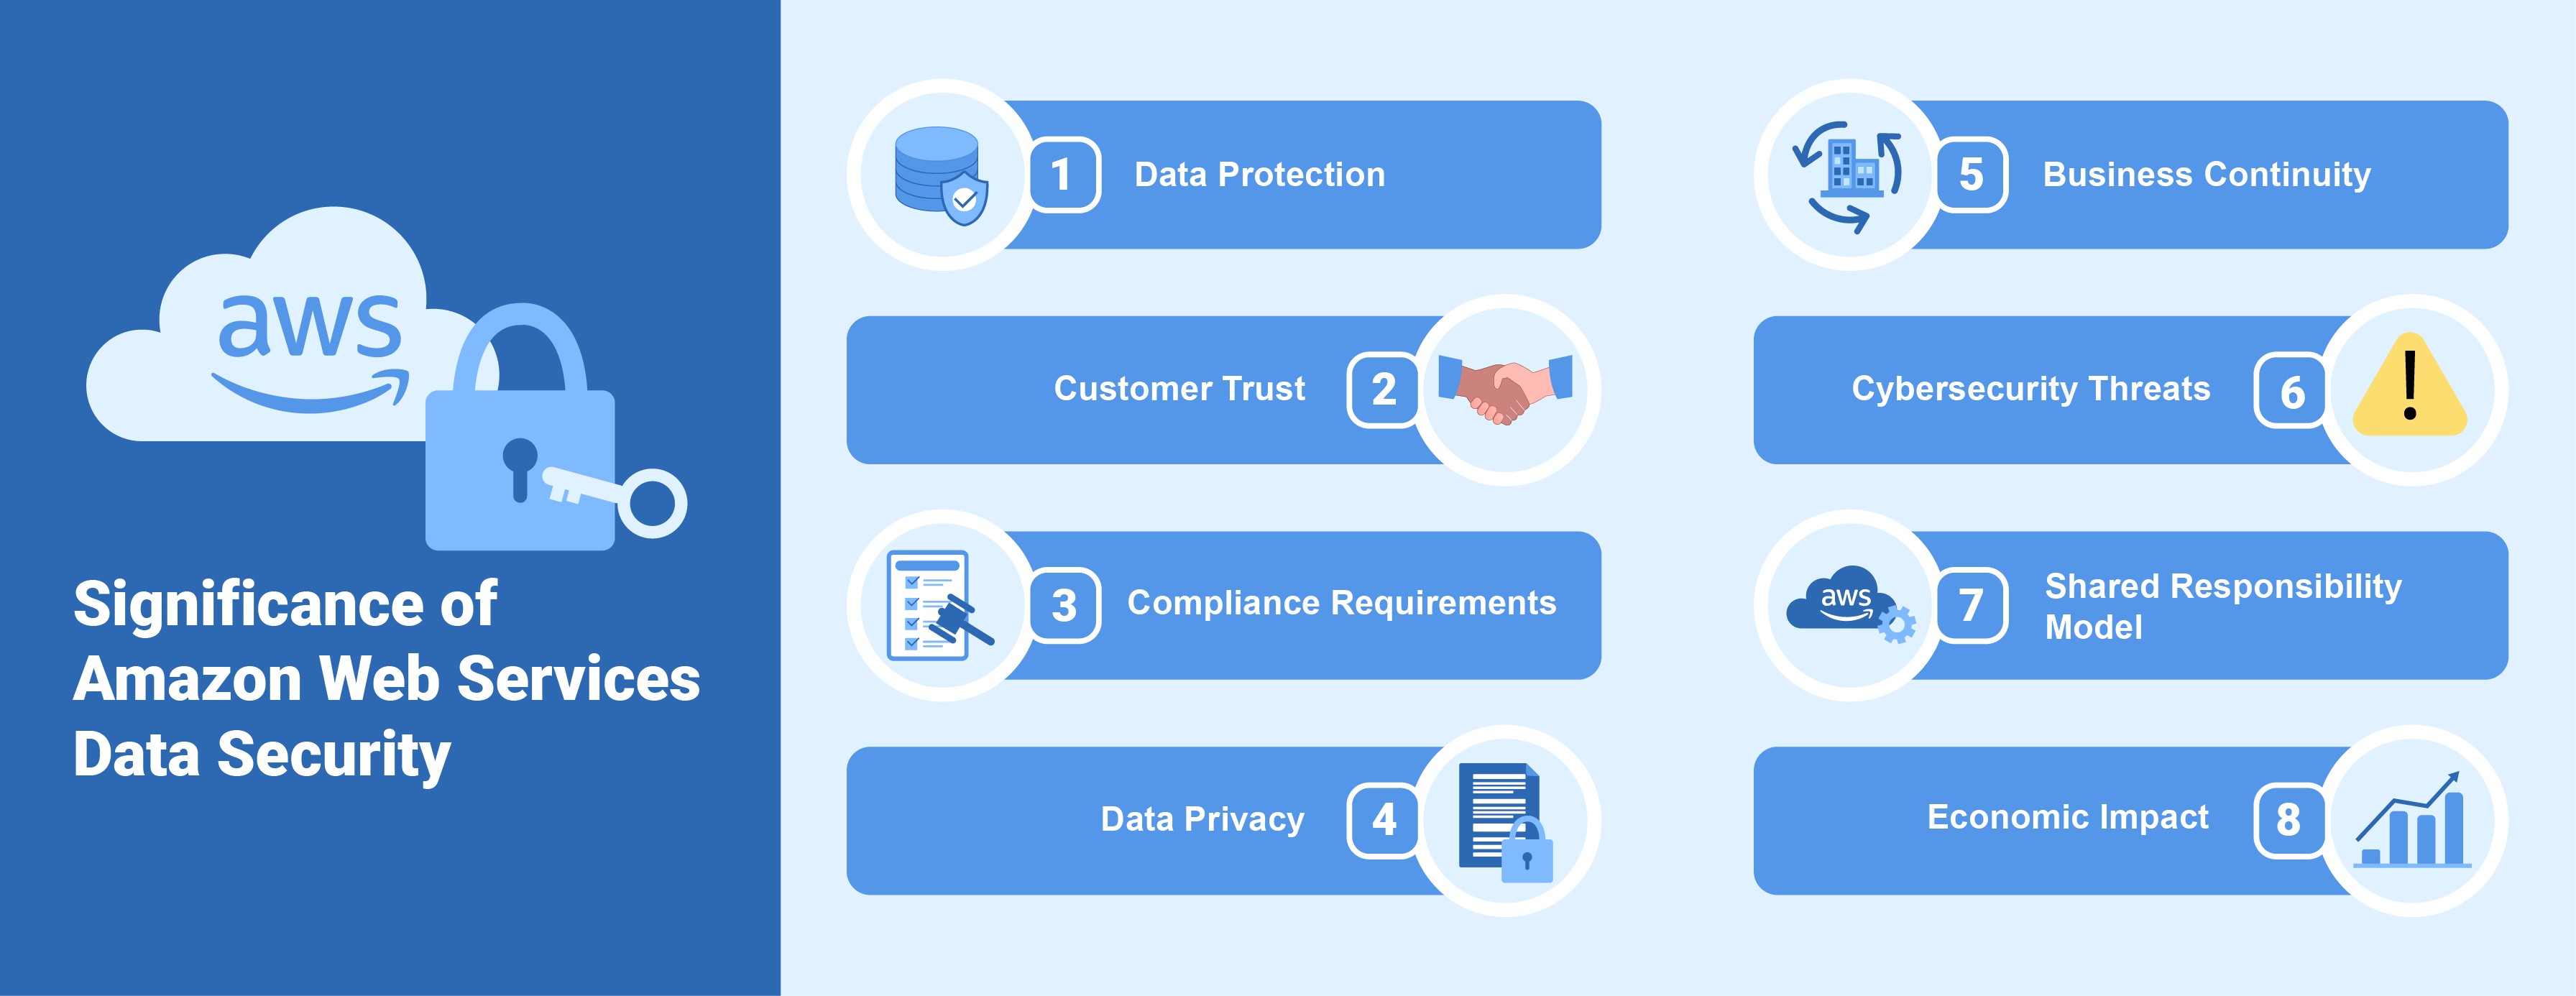 Significance of Amazon Web Services Data Security